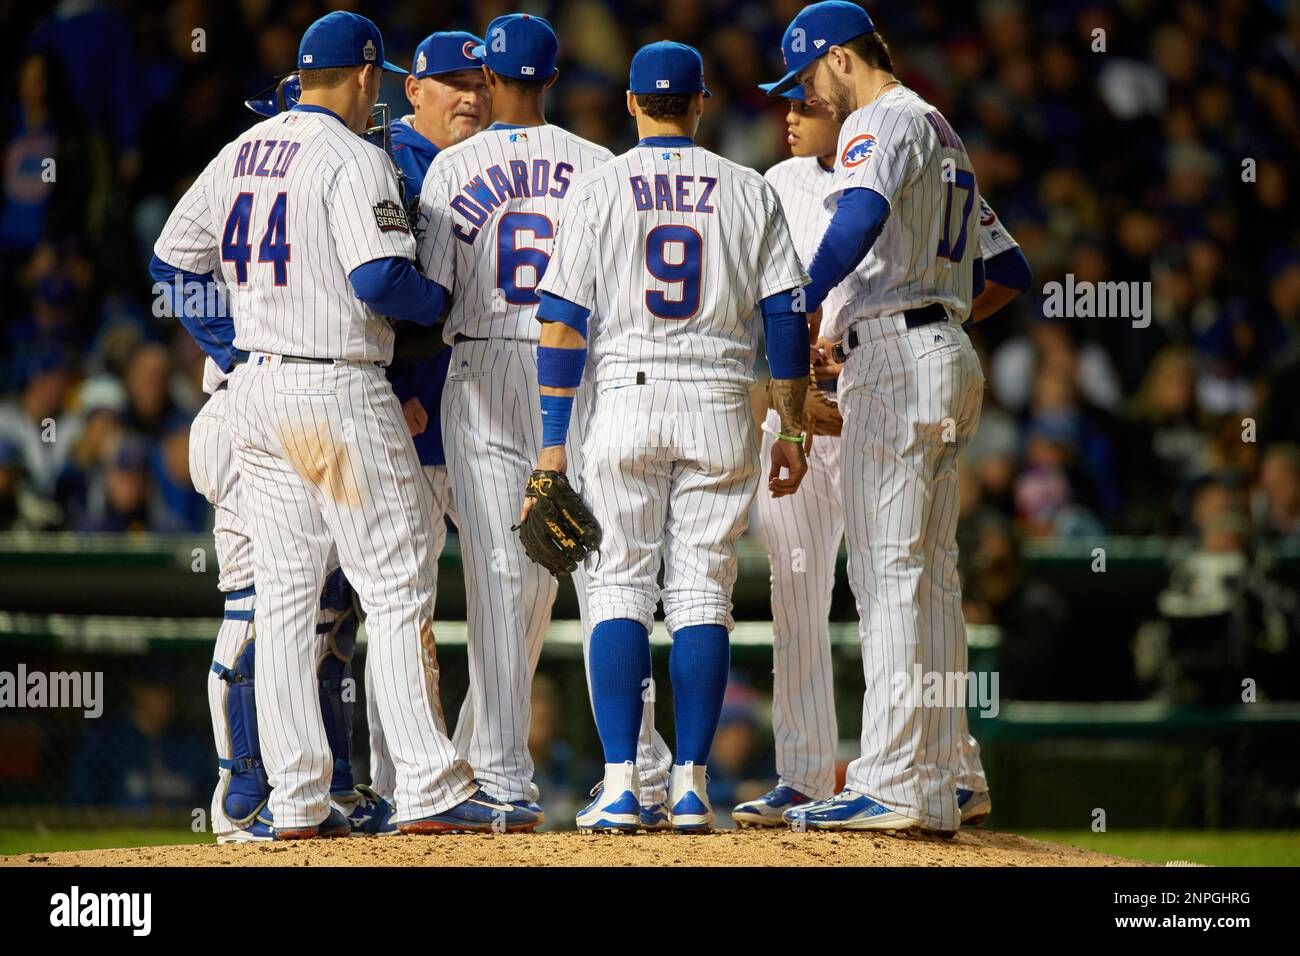 Chicago Cubs pitching coach Chris Bosio talks with pitcher Carl Edwards Jr., (6) as Wilson Contreras (40), Anthony Rizzo (44), Javier Baez (9), Kris Bryant (17), and Addison Russell (27) listen in